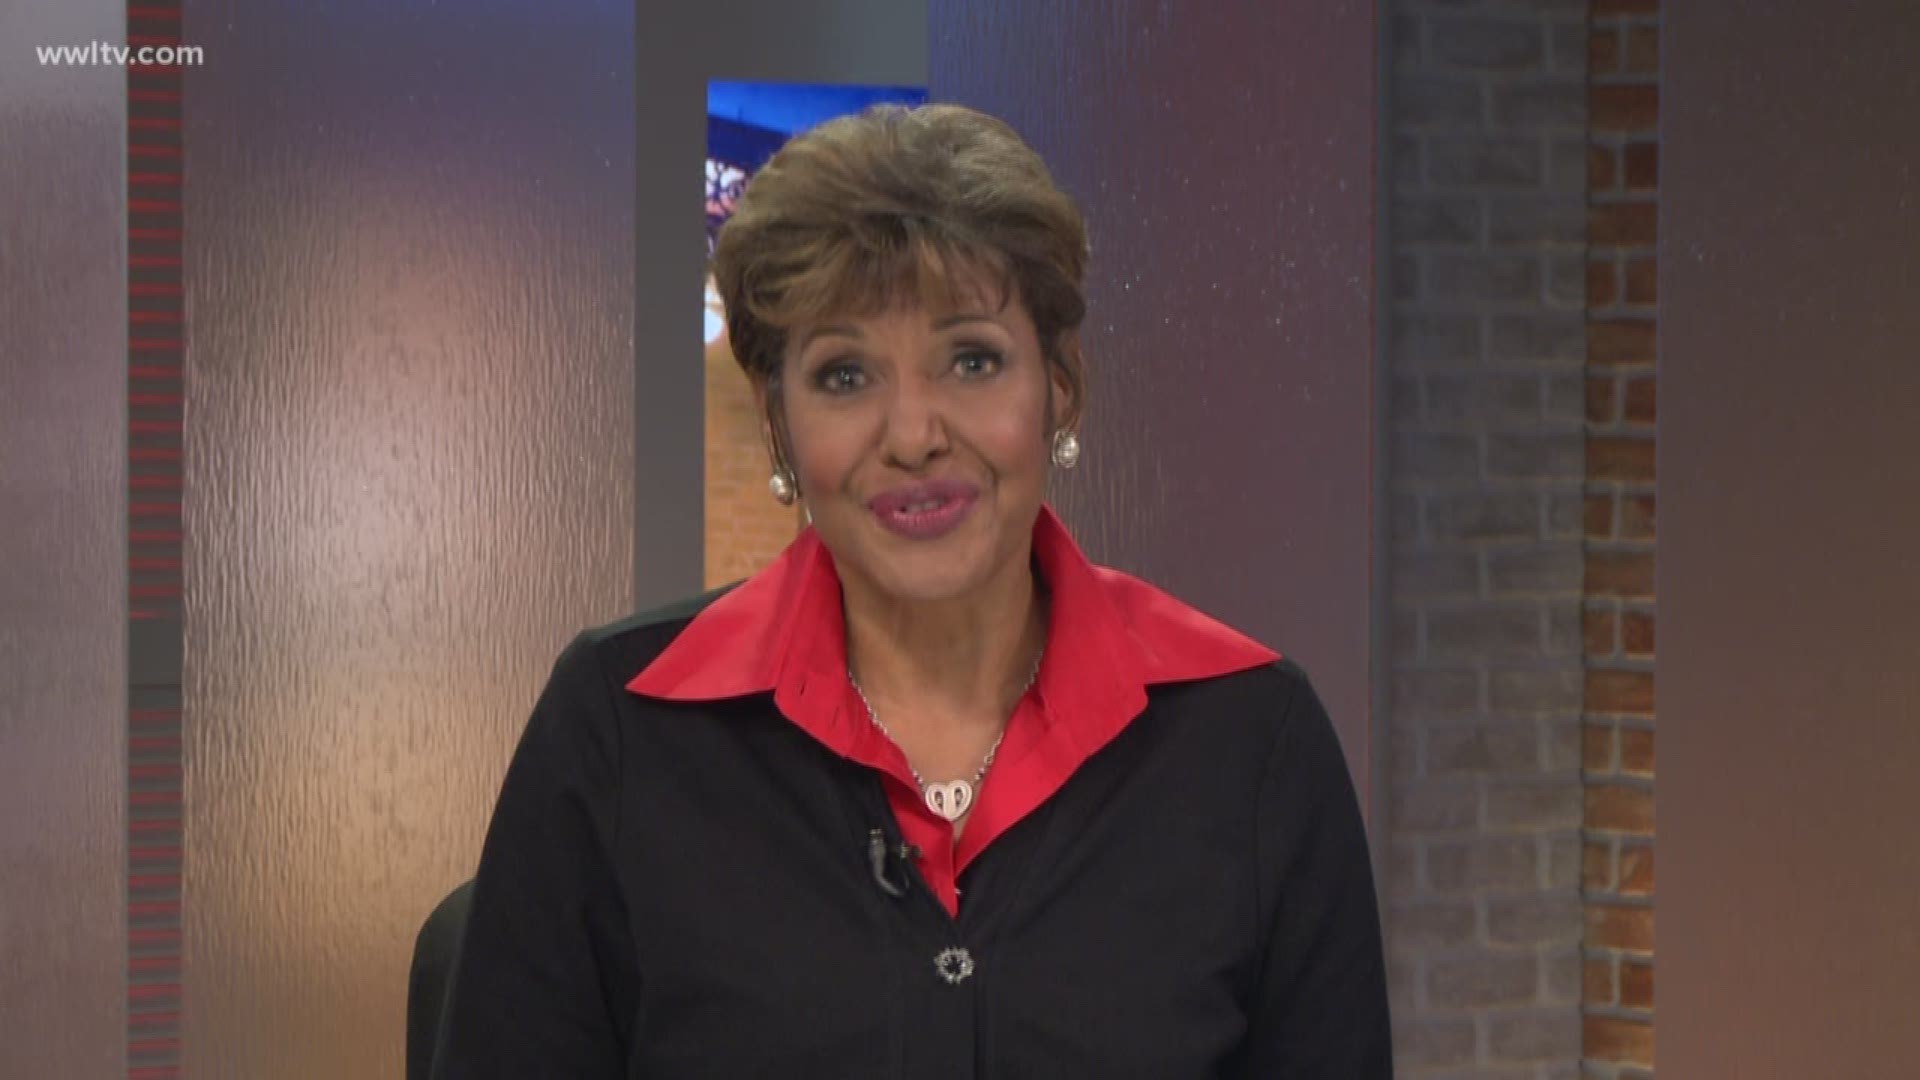 Sally-Ann Roberts to retire after 40 years at WWL-TV